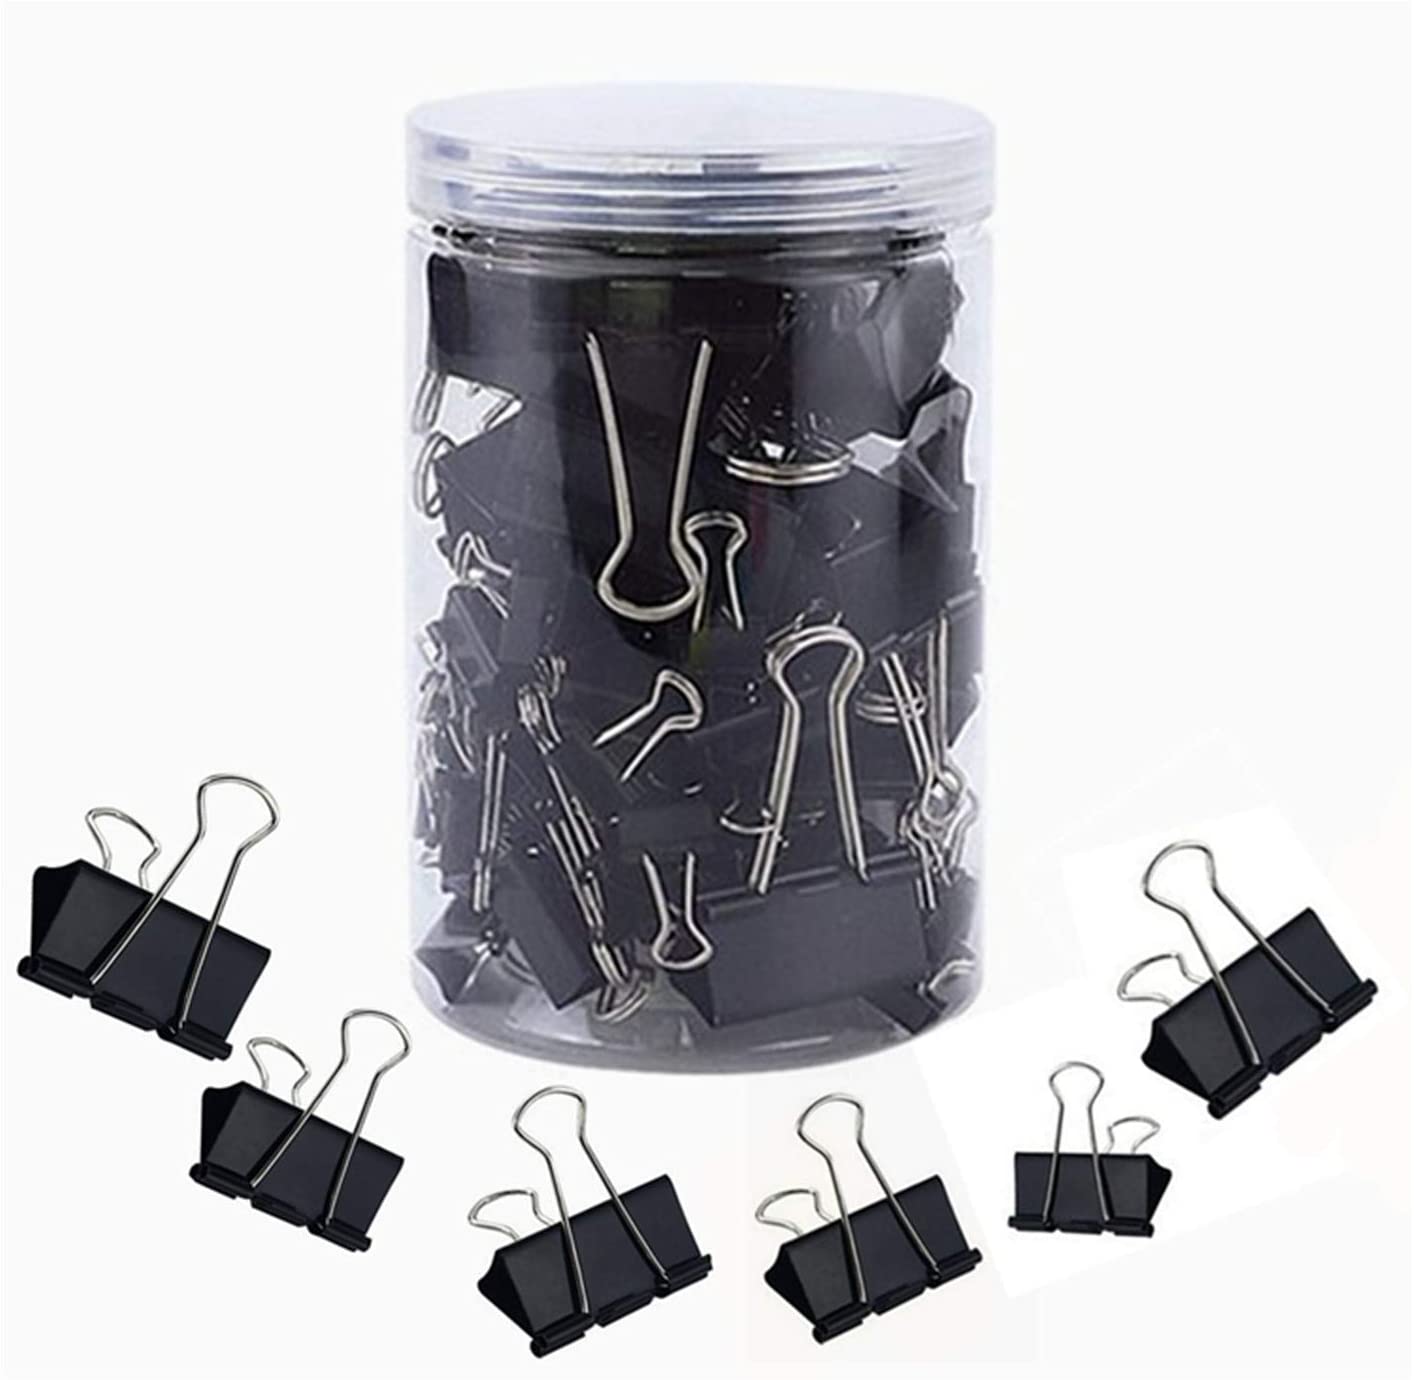 Binder Clips Kit 145Pcs Long Tail Clamp Set for Desk Organizer Accessories Binder Clips Office Stationery Supplies